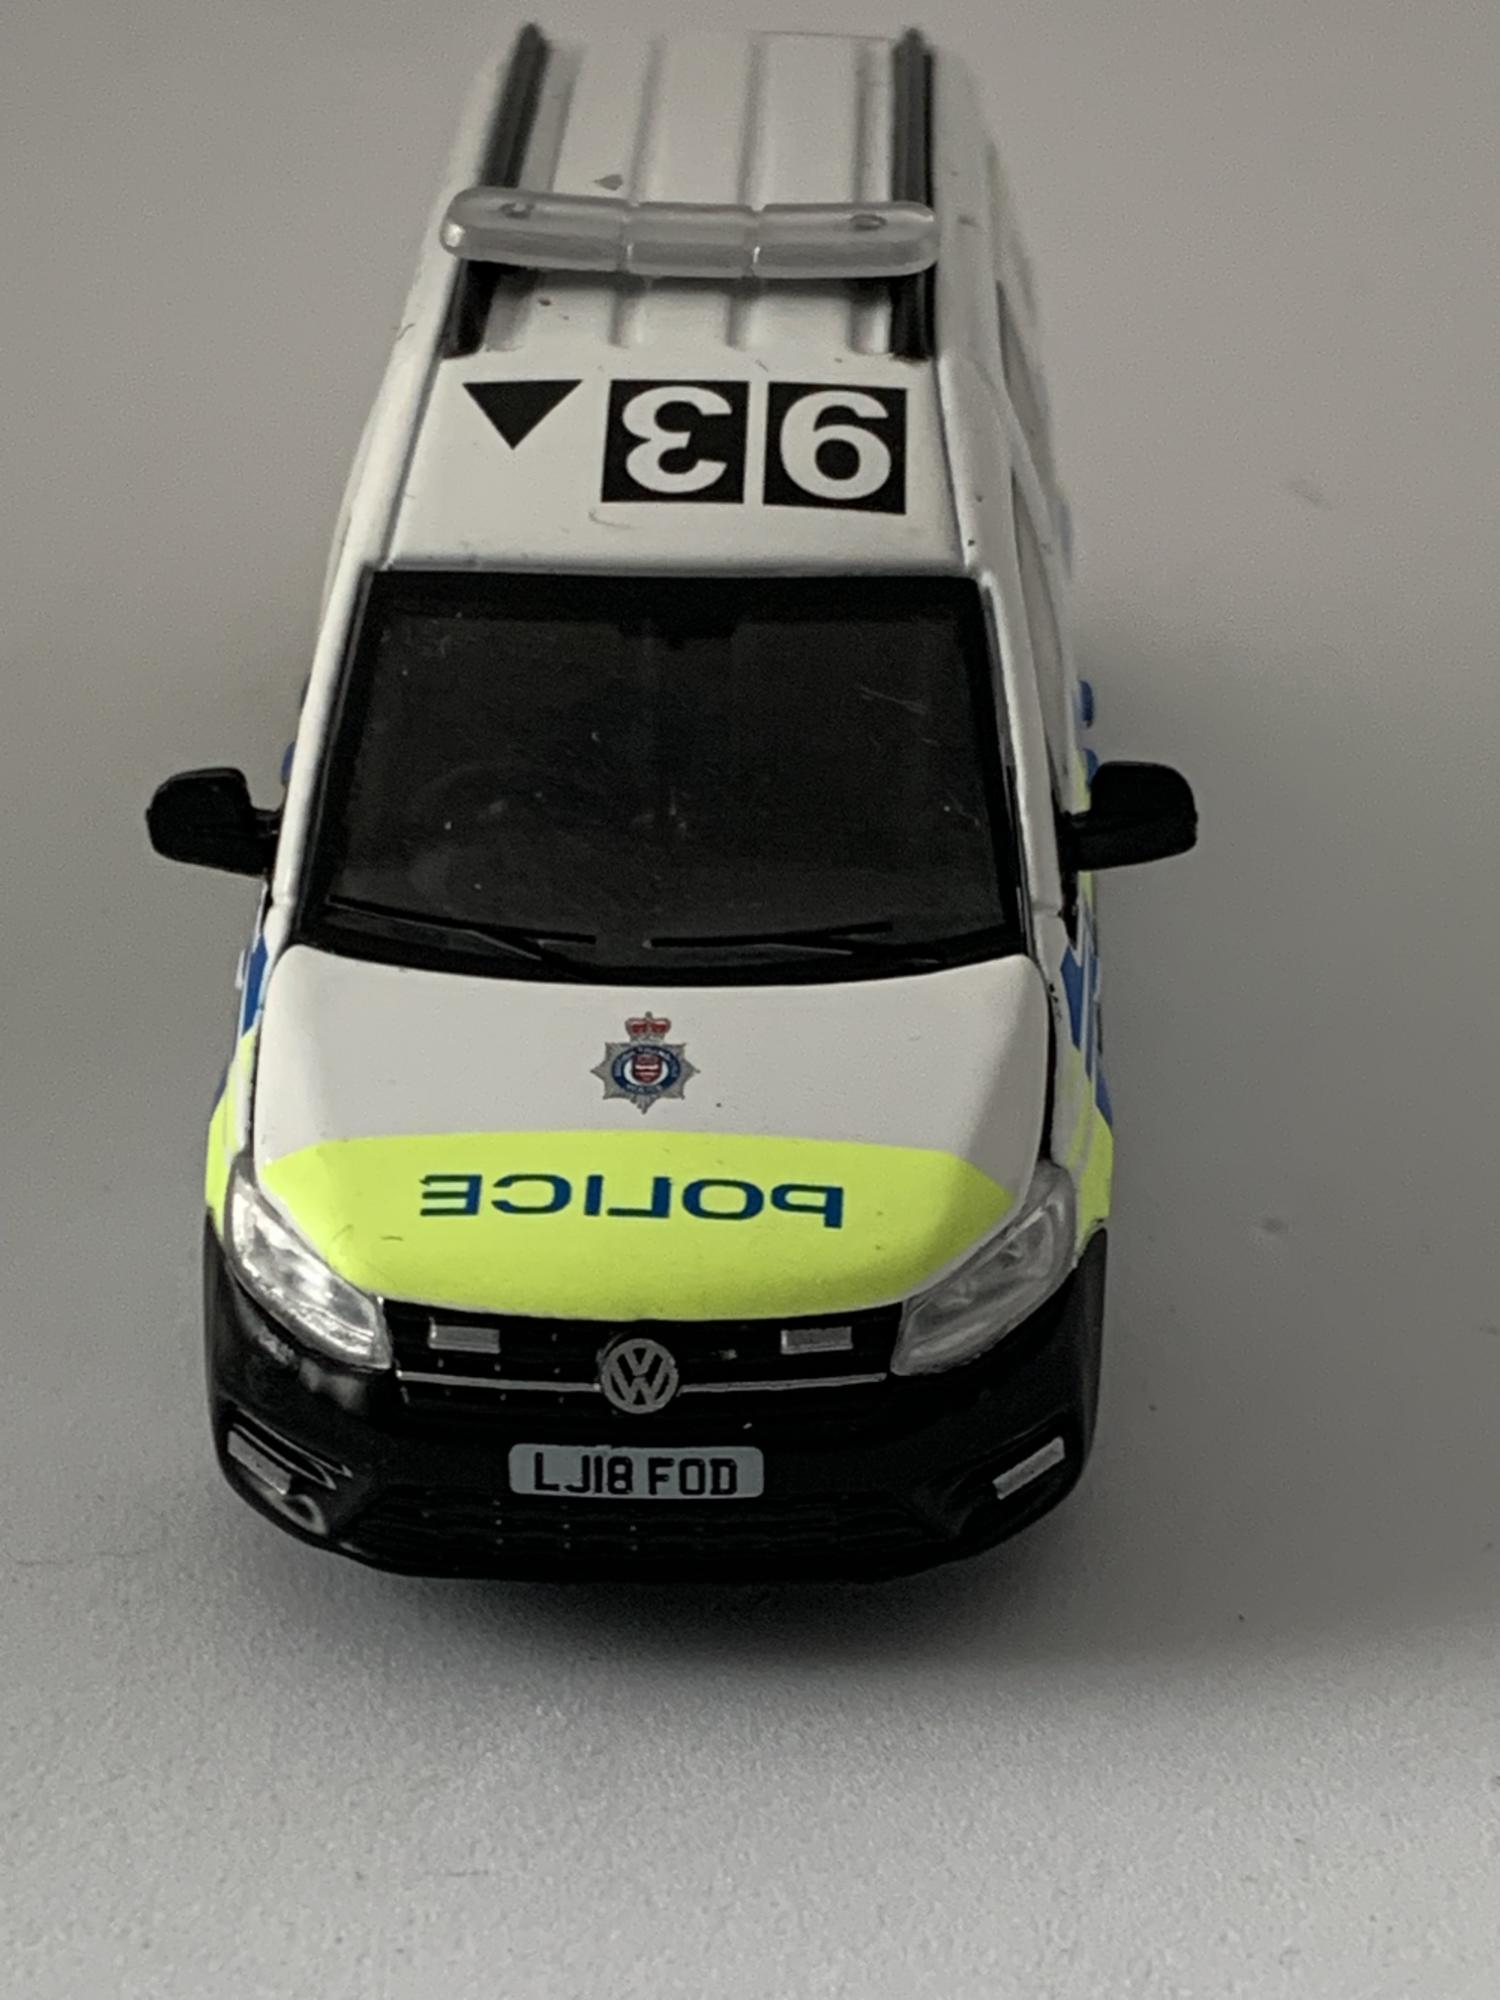 A good reproduction of the VW Caddy Maxi with detail throughout, all authentically recreated. The model is presented in a box, the car is approx. 7.5 cm long and the box is 9 cm long